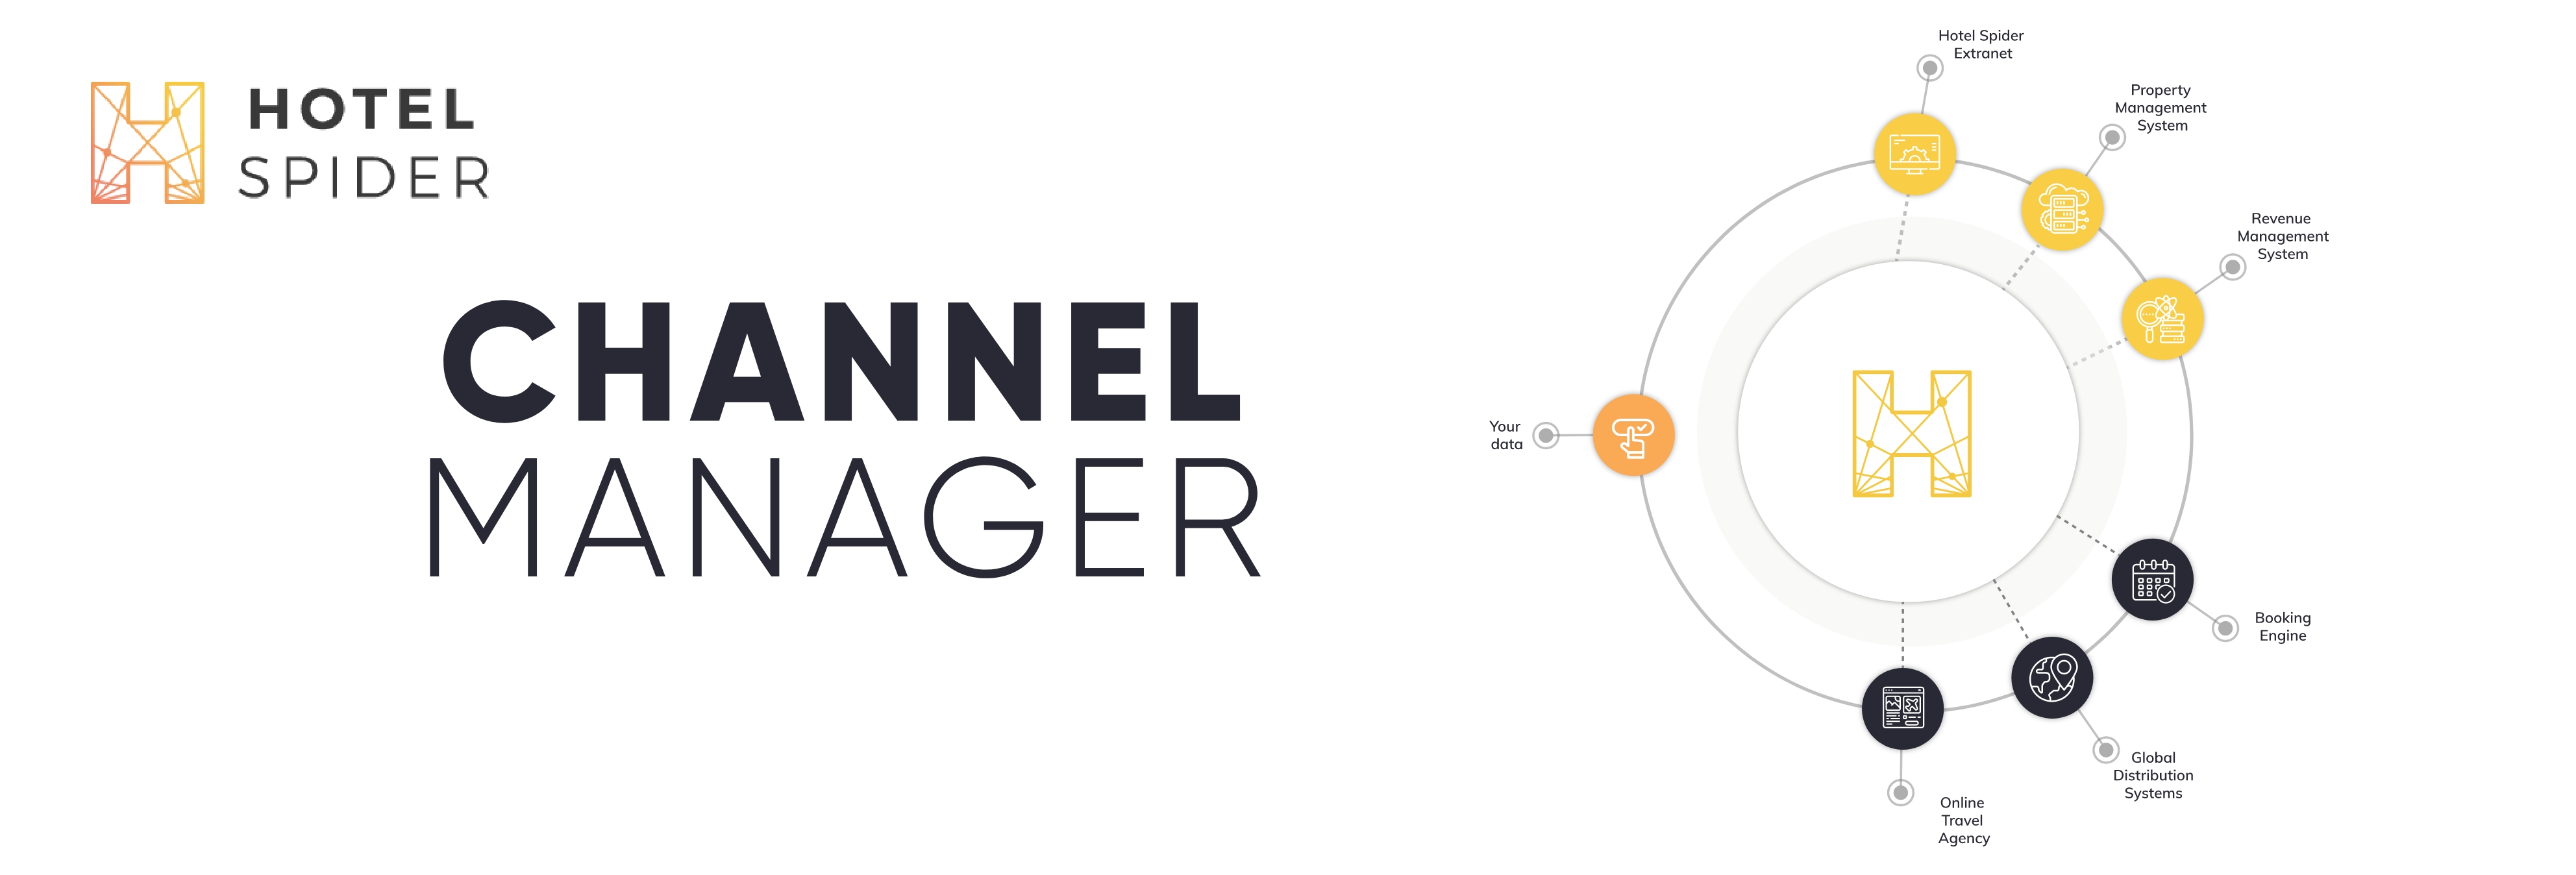 Hotel Channel Manager  Channel Manager for Hotels